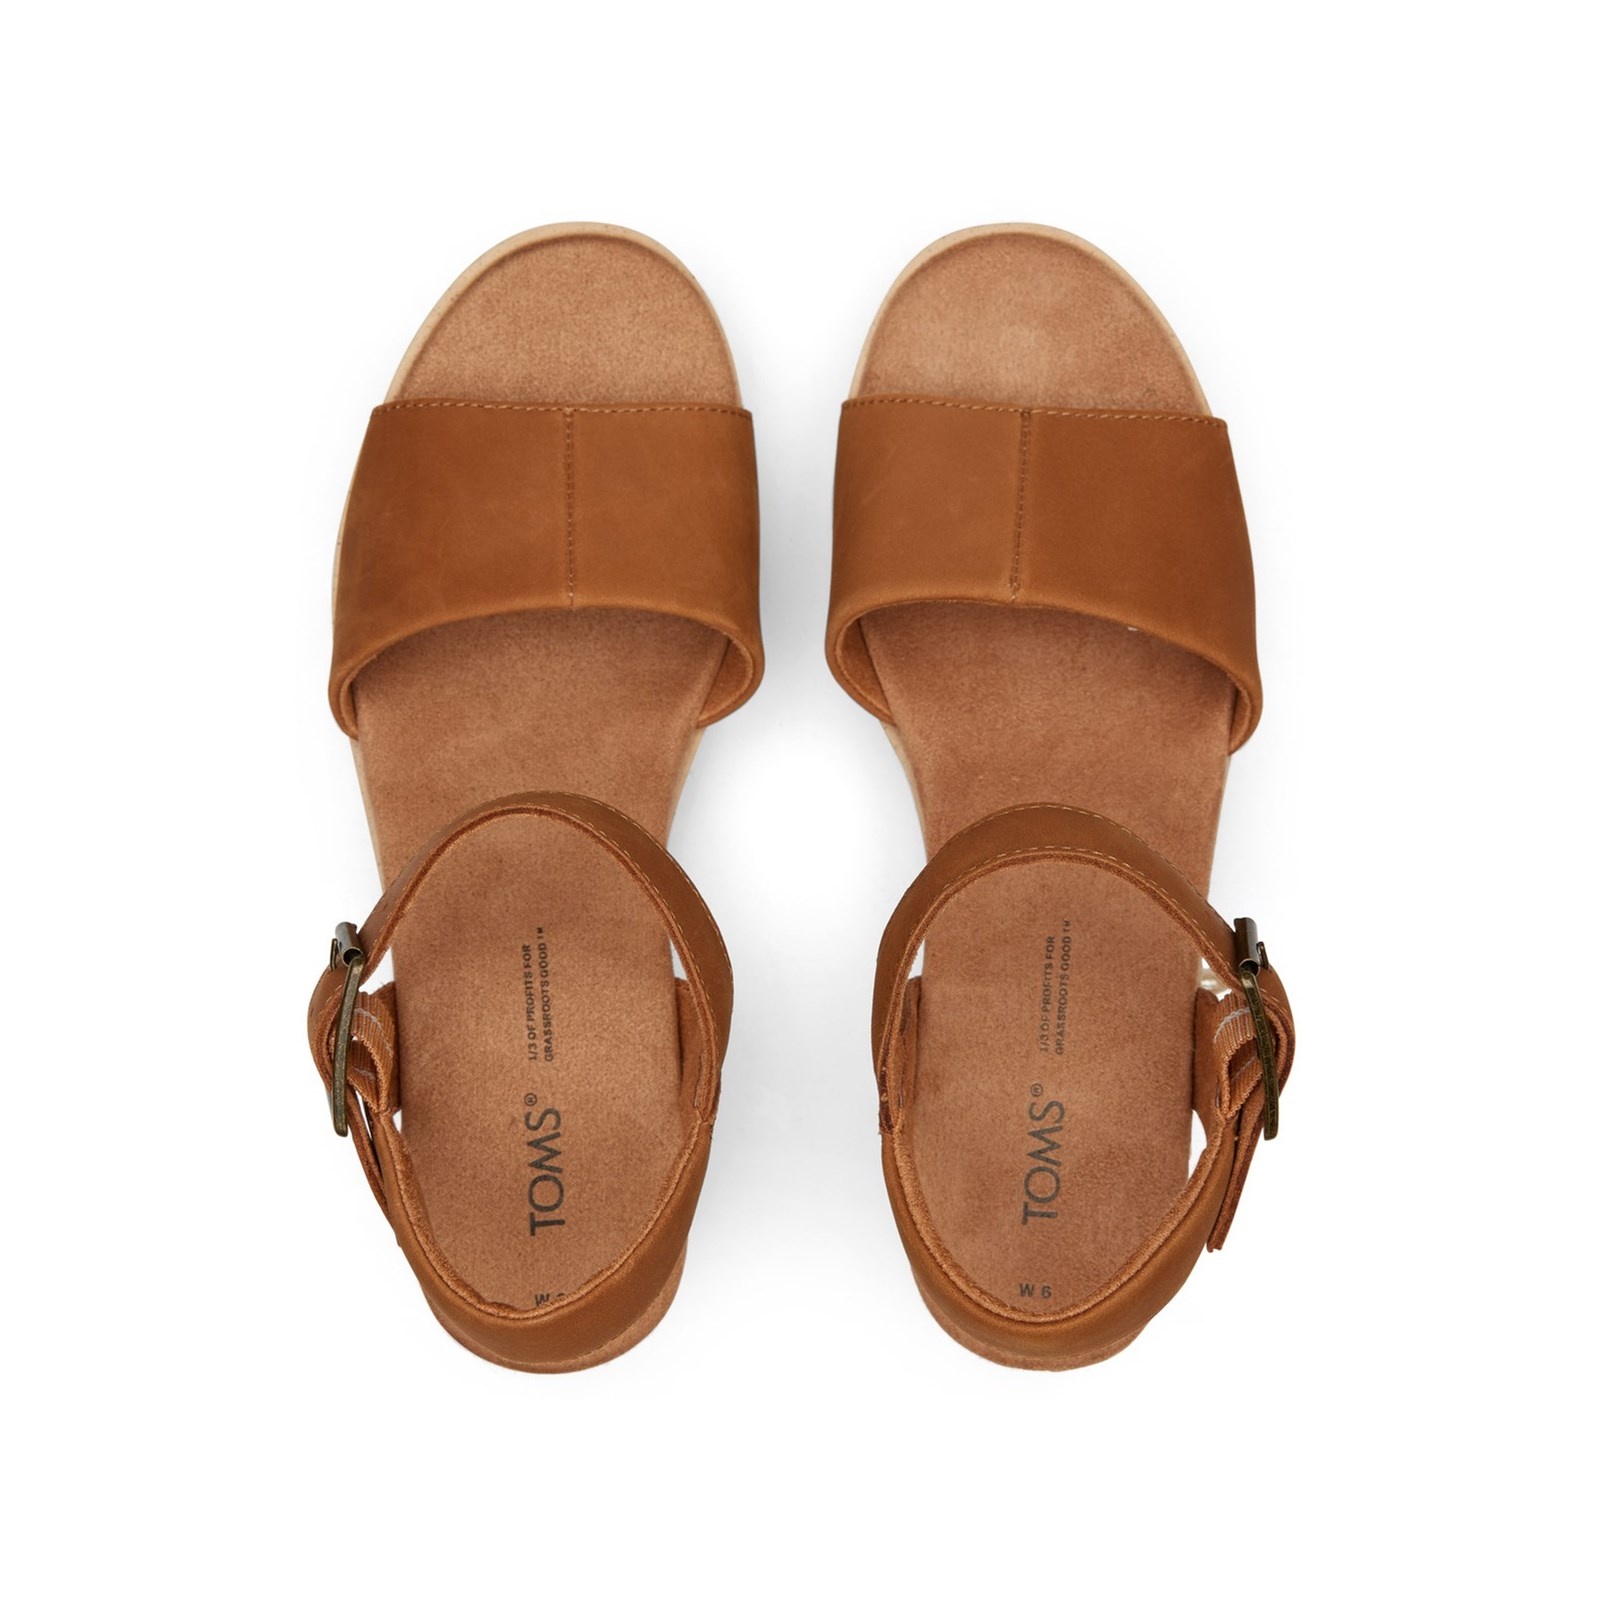 Toms Diana Tan Leather